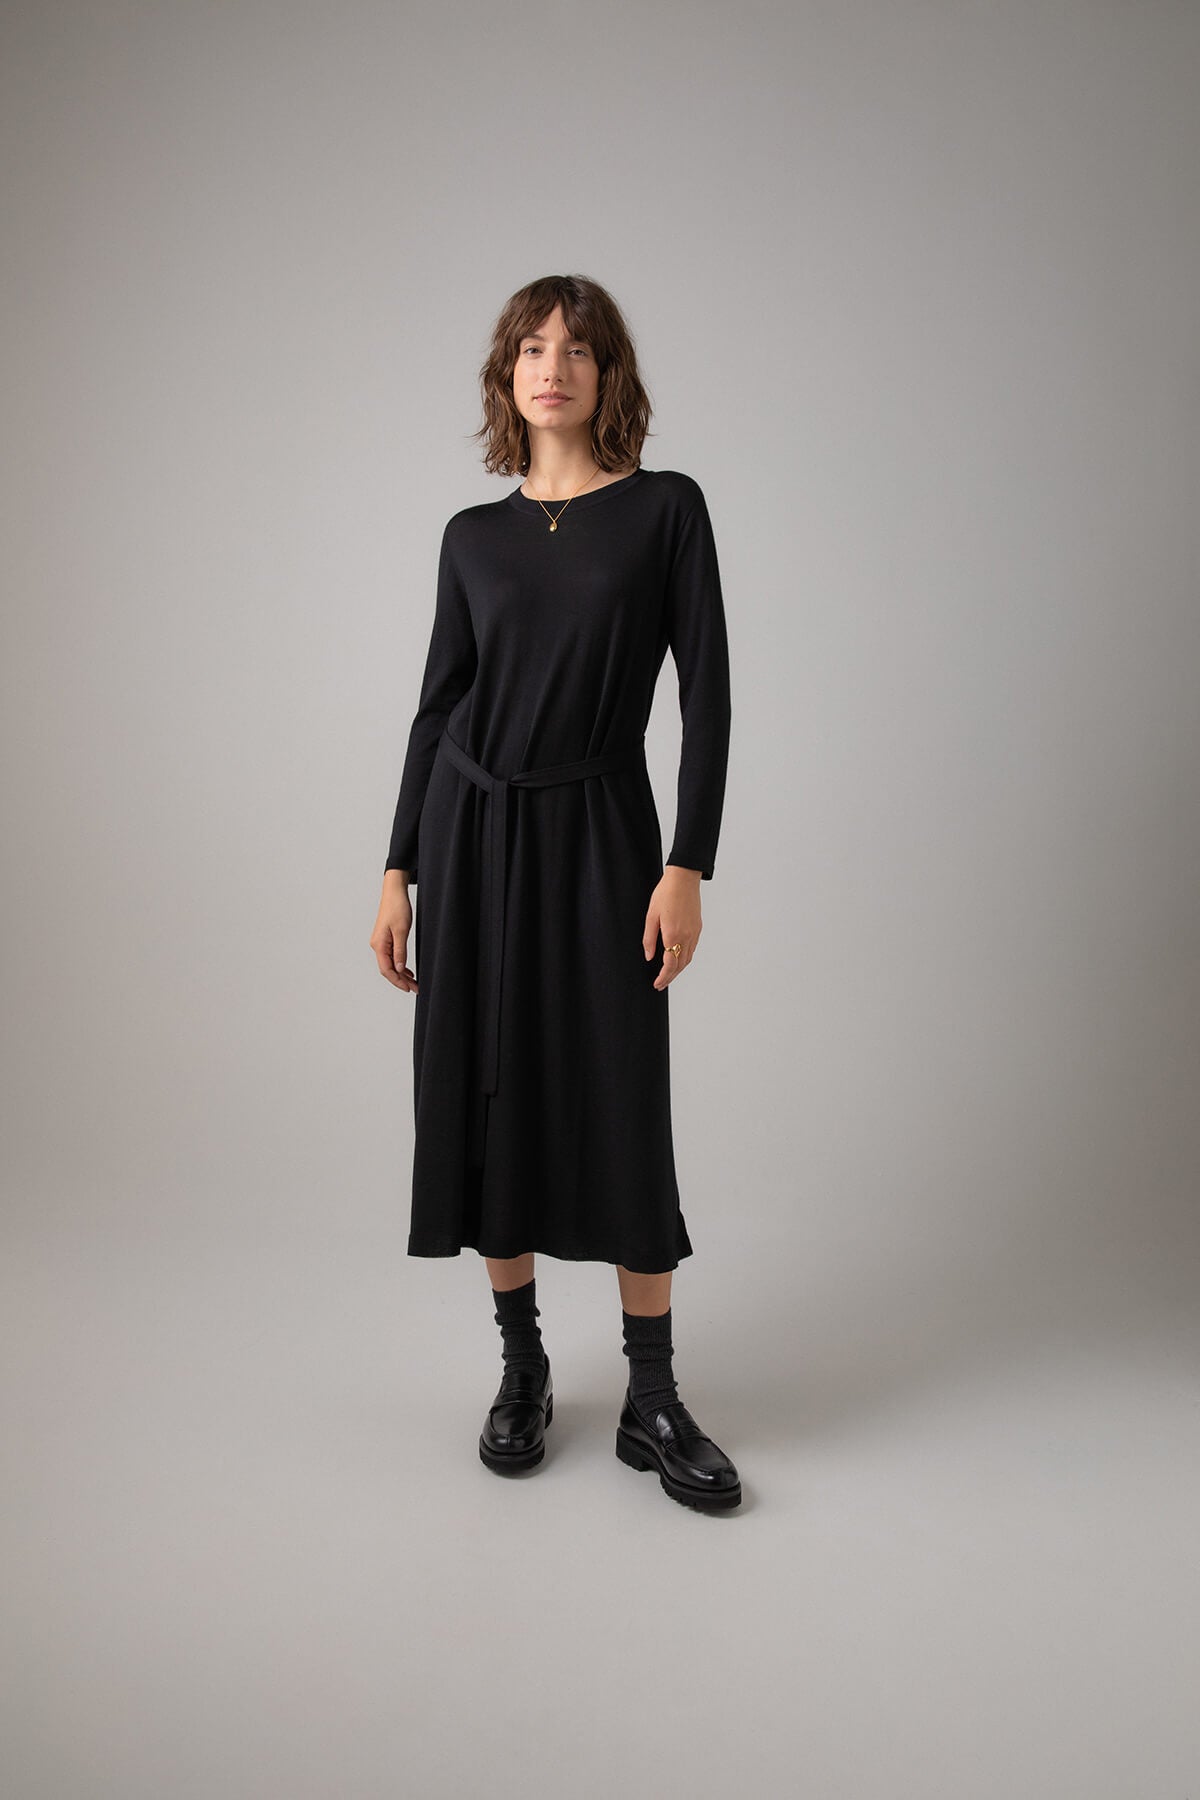 Johnstons of Elgin Women's Superfine Merino Belted T-Shirt Dress in Black worn with Black Socks & Shoes on a grey background KDI00685SA7131